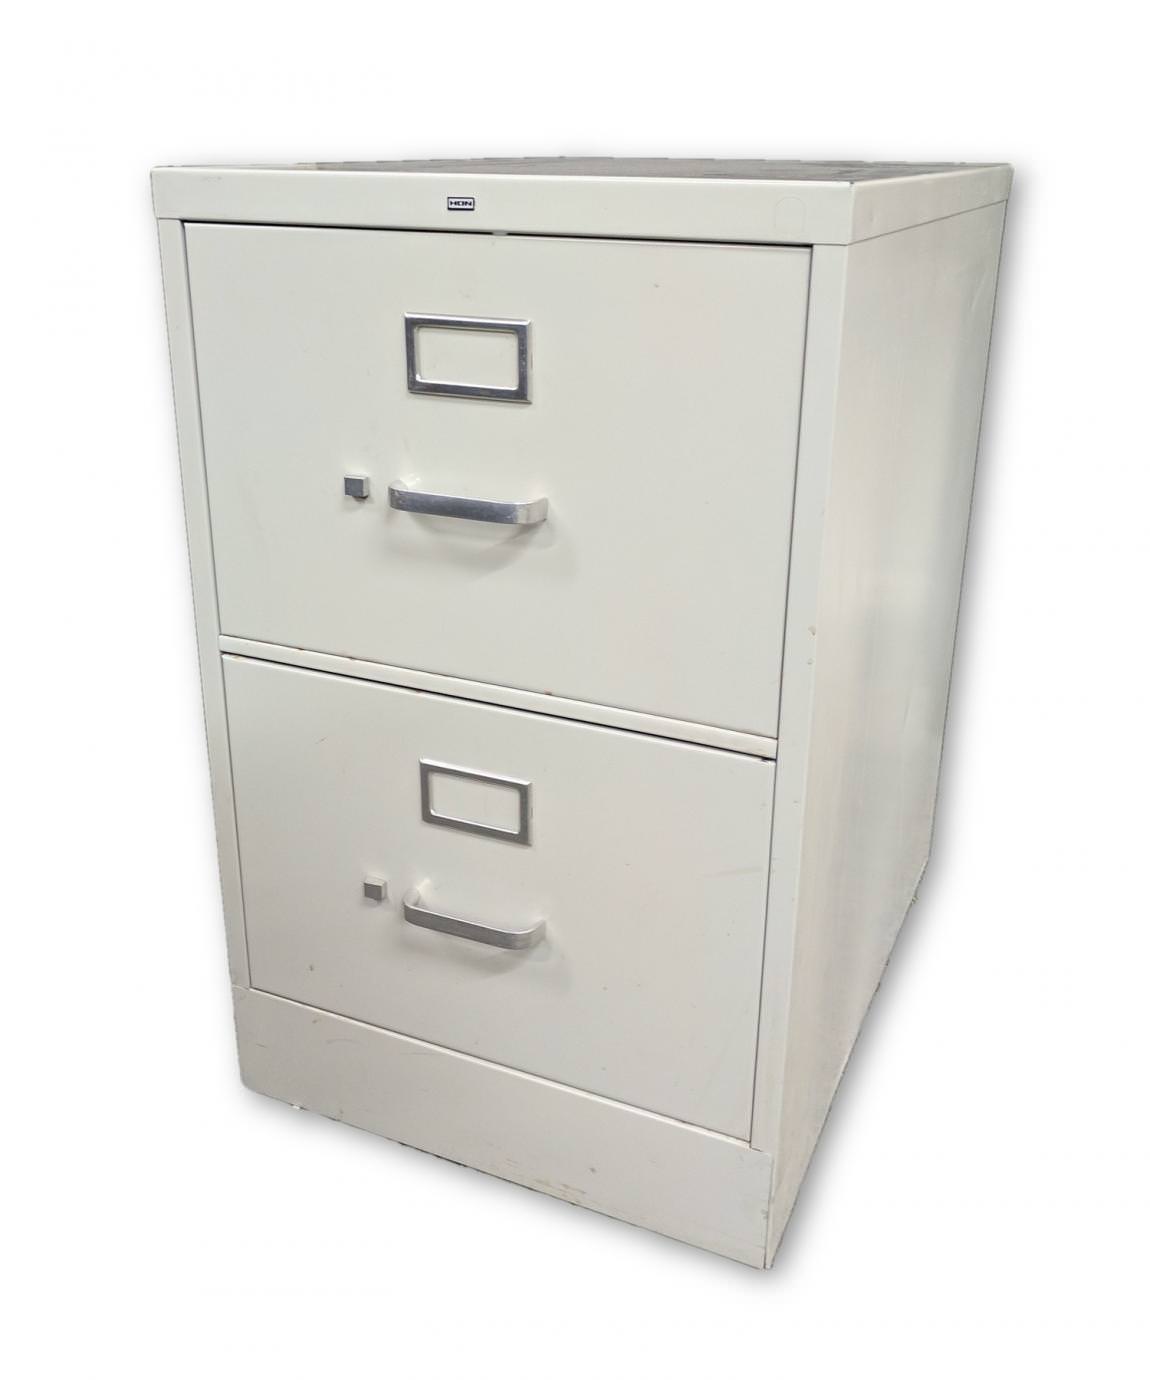 Putty Hon 2 Drawer Vertical Legal File Cabinet : Hon